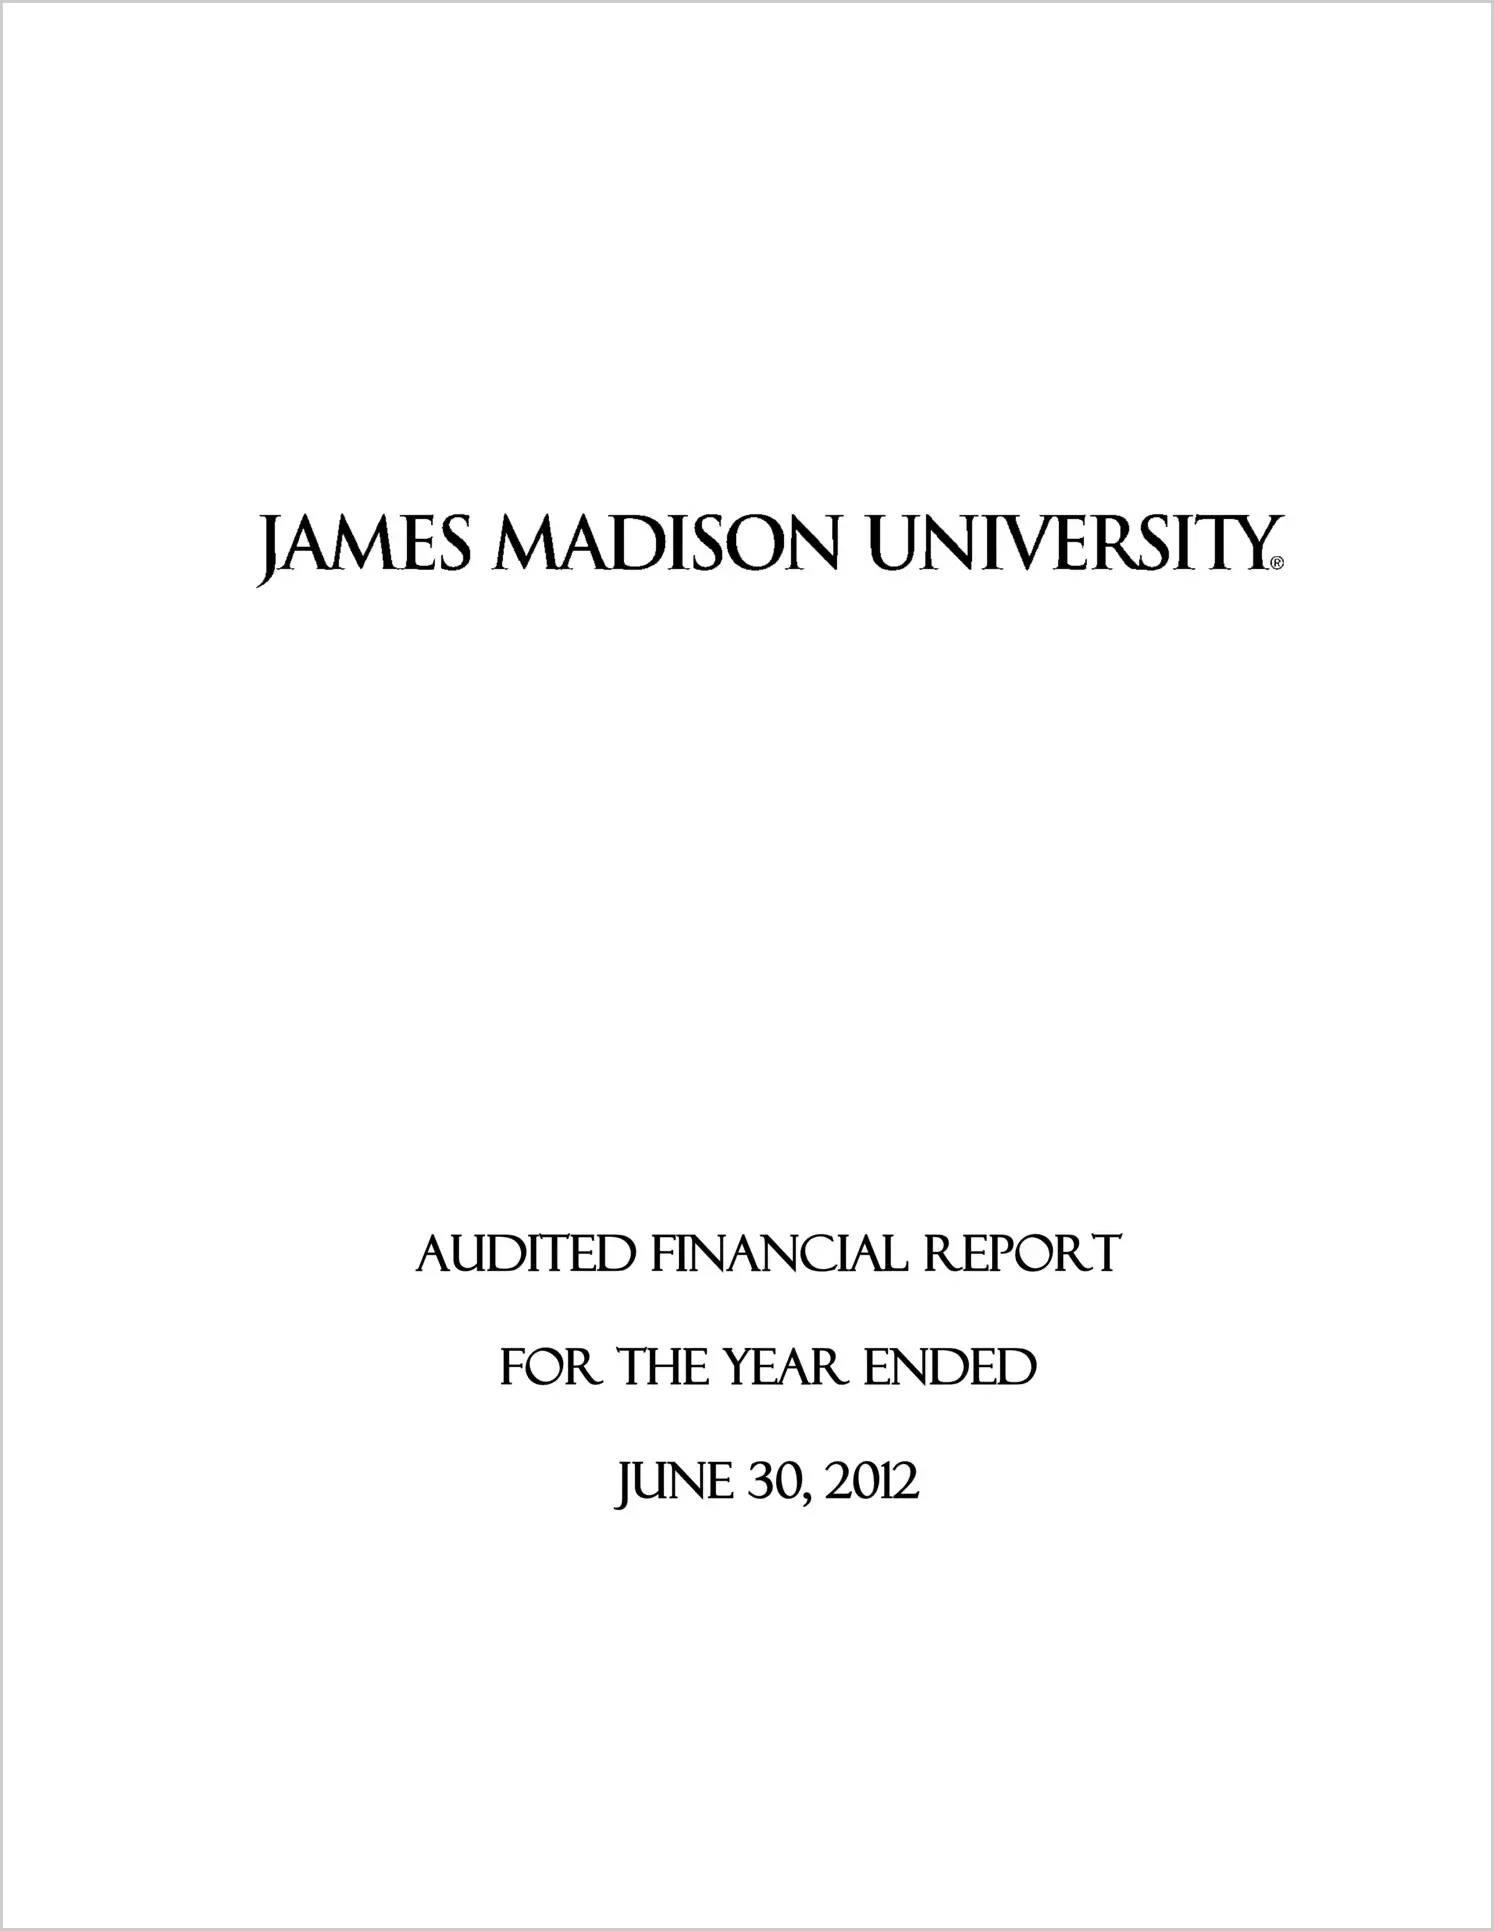 James Madison University Financial Statements for the year ended June 30, 2012